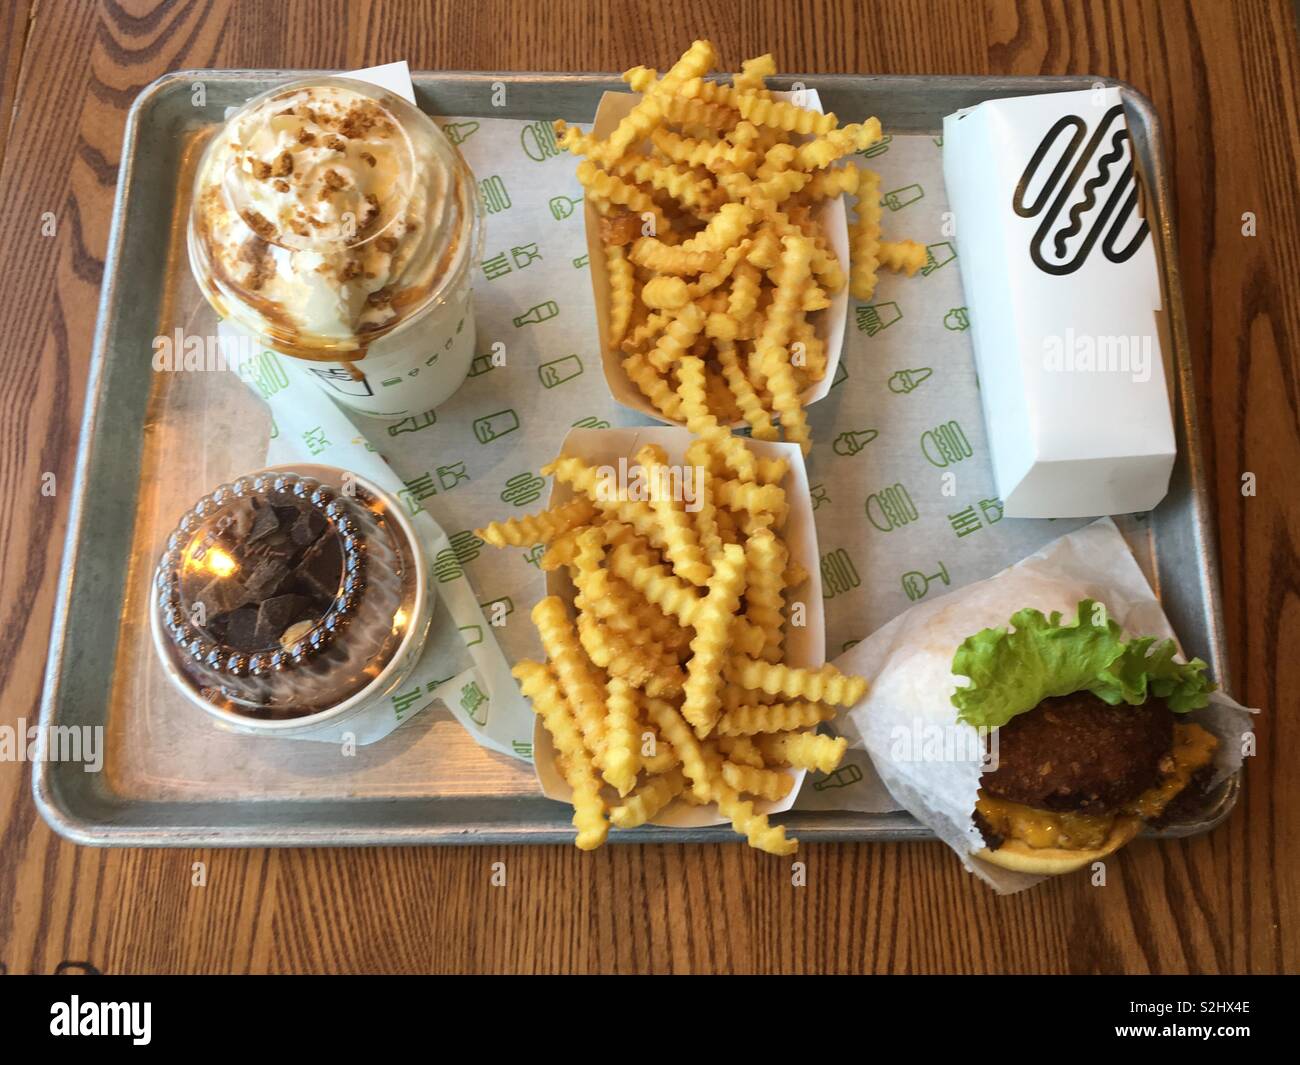 A tray of food from the Shake Shack. Apple pie milkshake with a chocolate brownie concrete ice cream. Crinkle cut chips a stack burger and a hotdog. Stock Photo